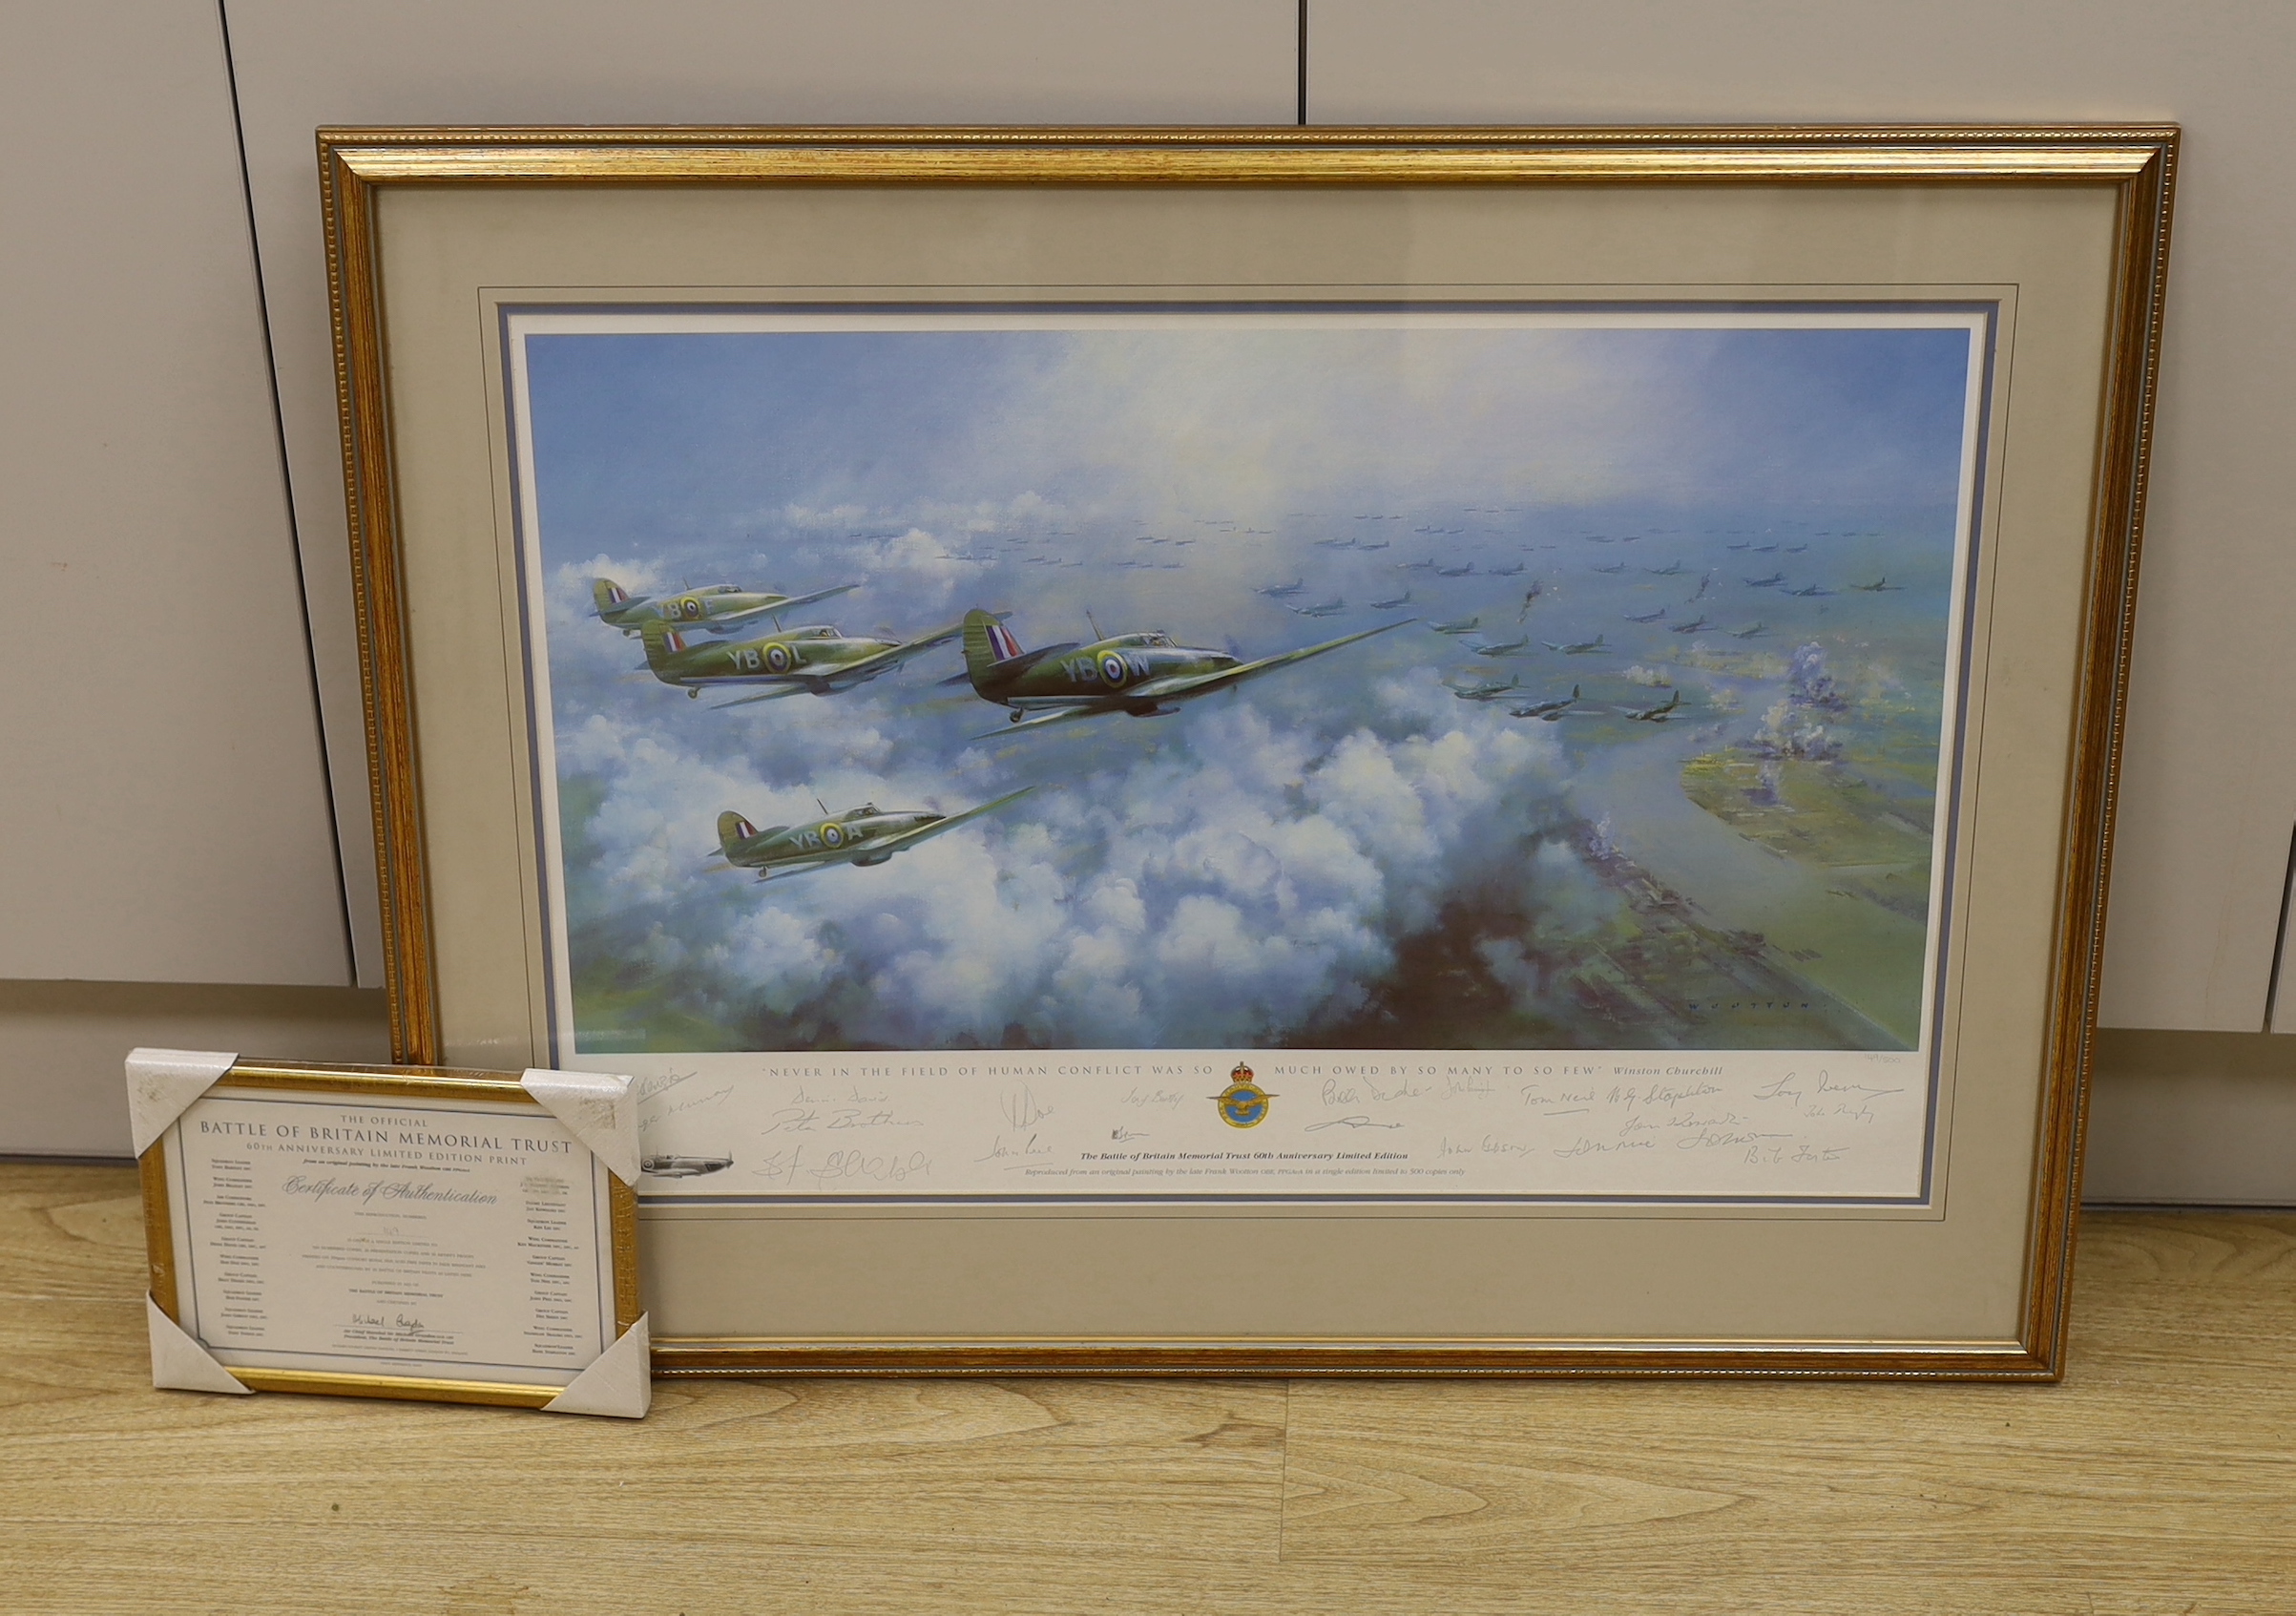 Frank Wootton (1911-1998), colour print, The Battle of Britain Memorial Trust 60th Anniversary, signed in pencil by fighter pilots including Tony Bartley and John Beazley, limited edition 149/500, 47 x 68cm, with COA